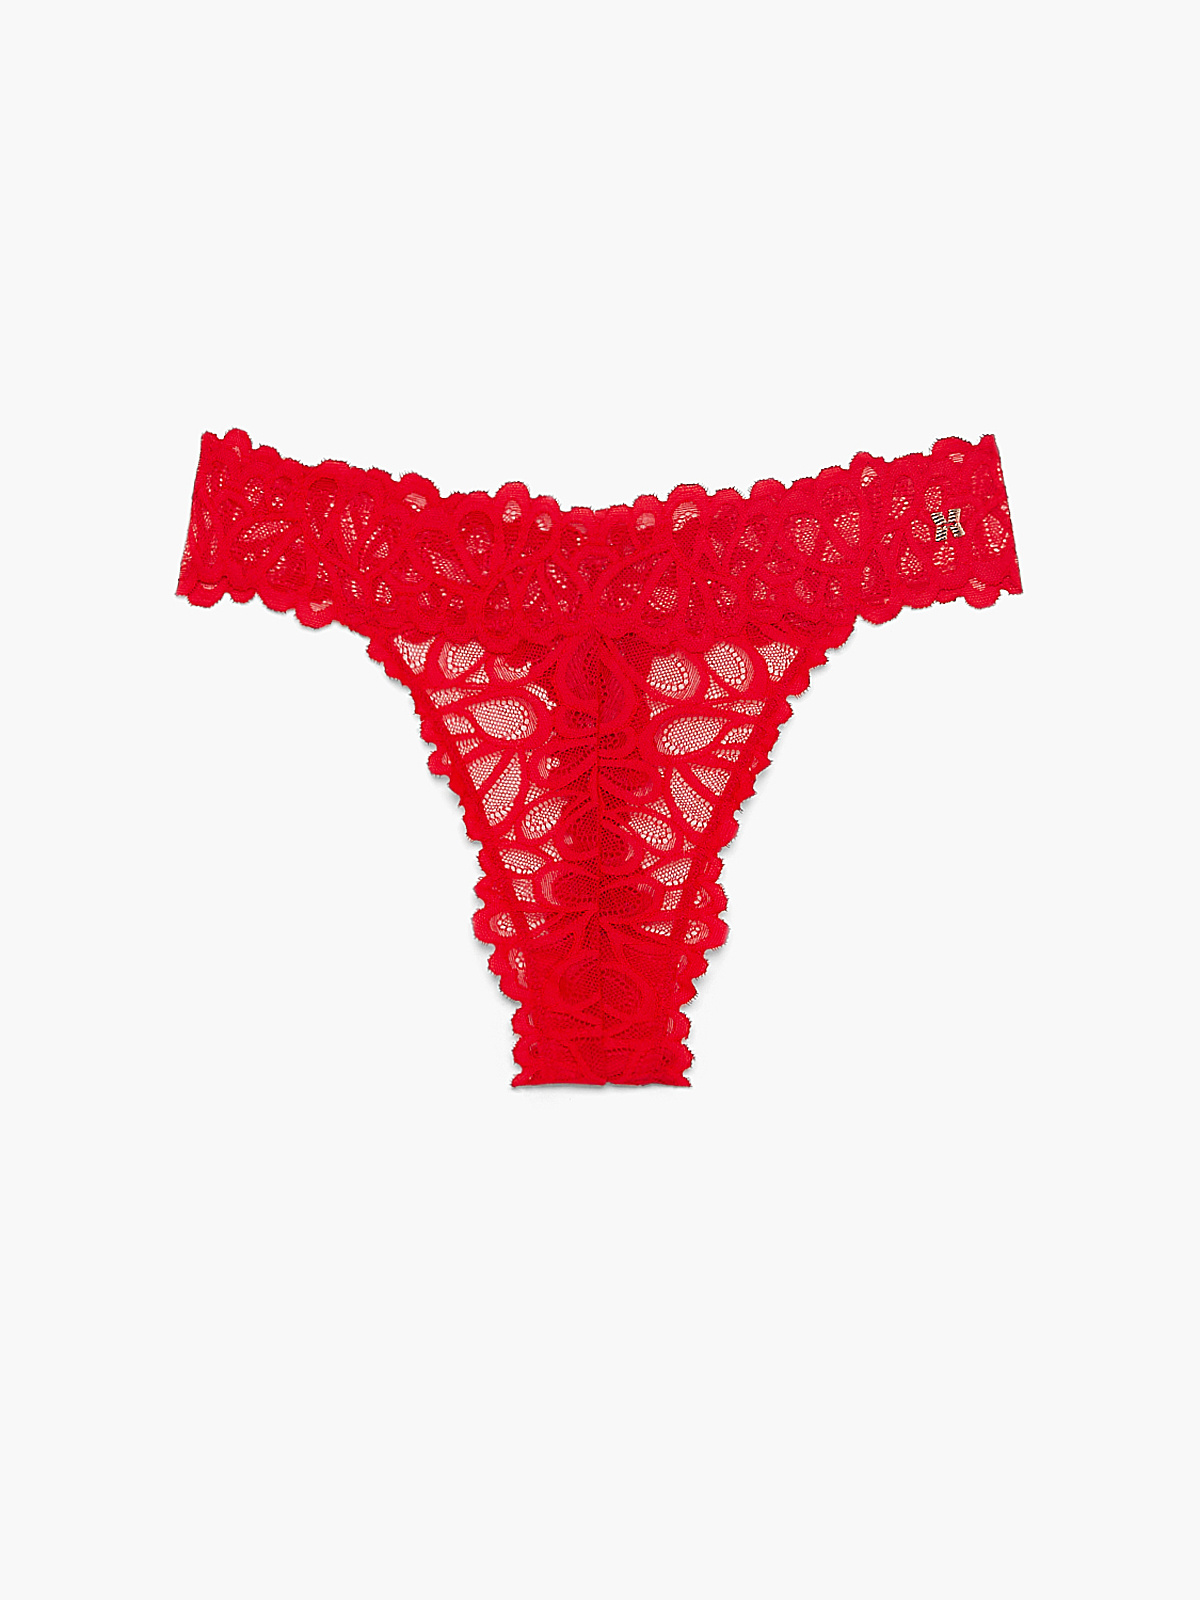 https://cdn.savagex.com/media/images/products/UD2044214-6036/SAVAGE-NOT-SORRY-LACE-THONG-PANTY-UD2044214-6036-LAYDOWN-1200x1600.jpg